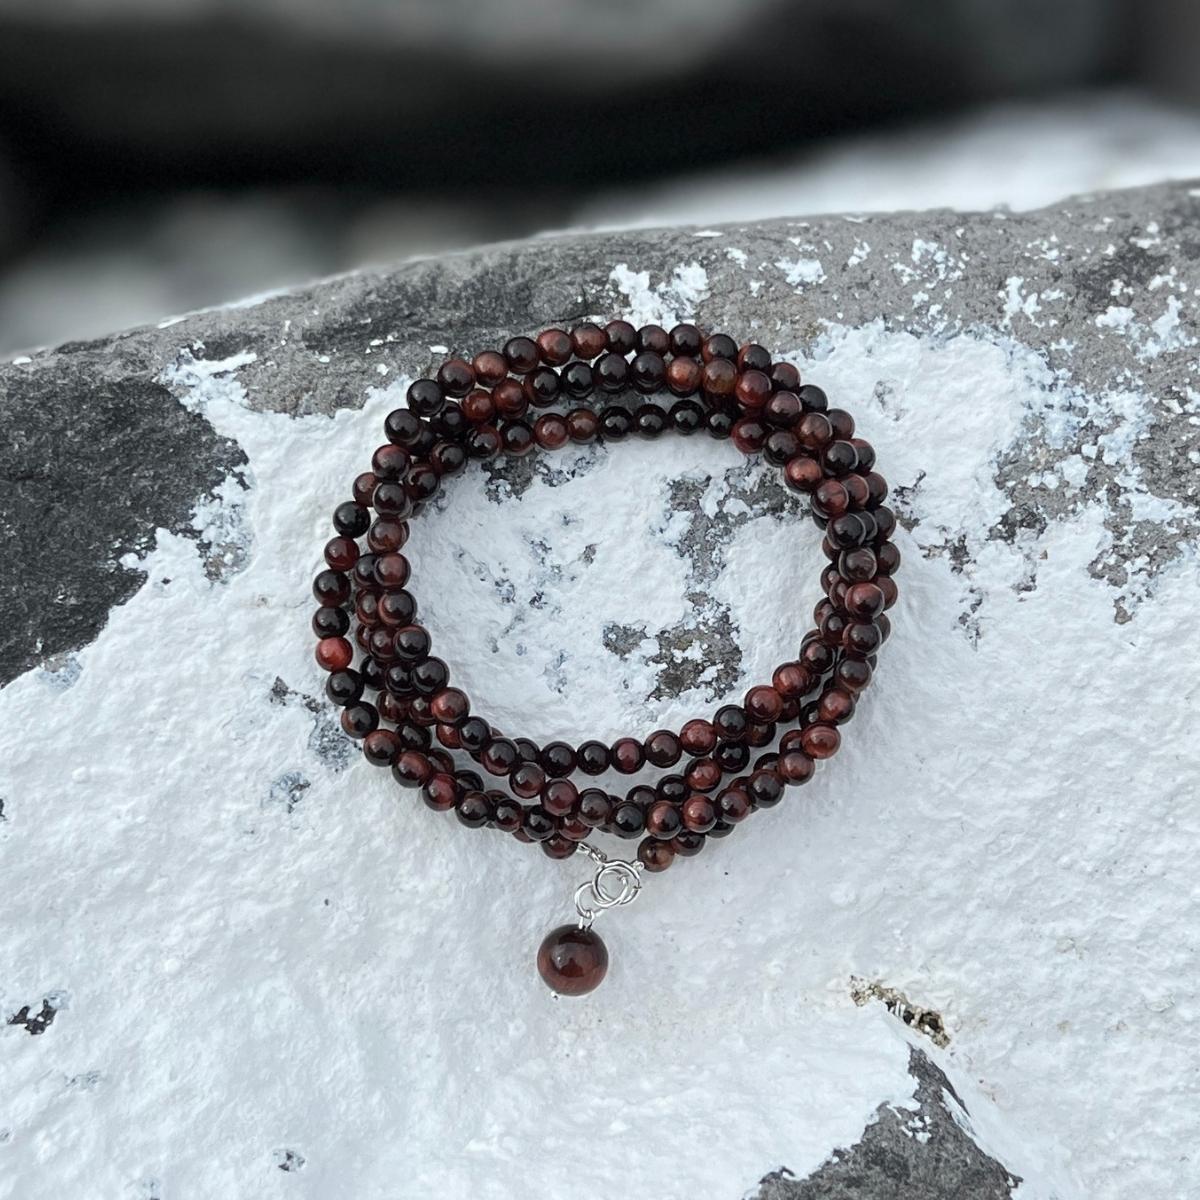 This Healing for Humanity Bracelet encourages us to giving back to our community through the healing properties of Red Tiger's Eye gemstone, which promotes balance, strength, and practical decision-making, providing individuals with the clarity and vision to make positive contributions to society.